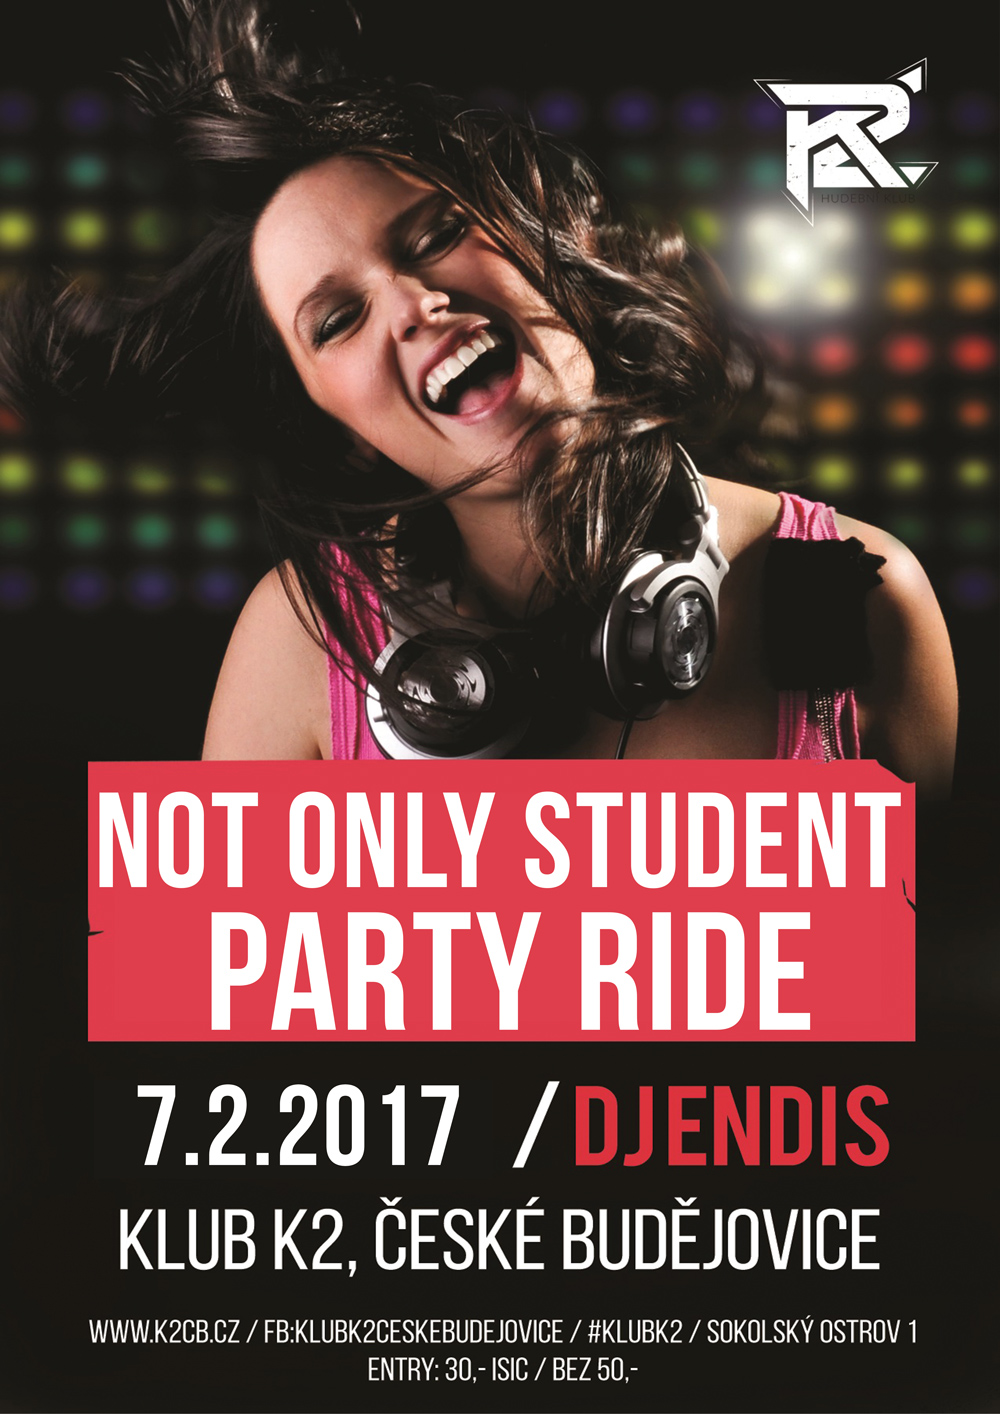 Not only student party